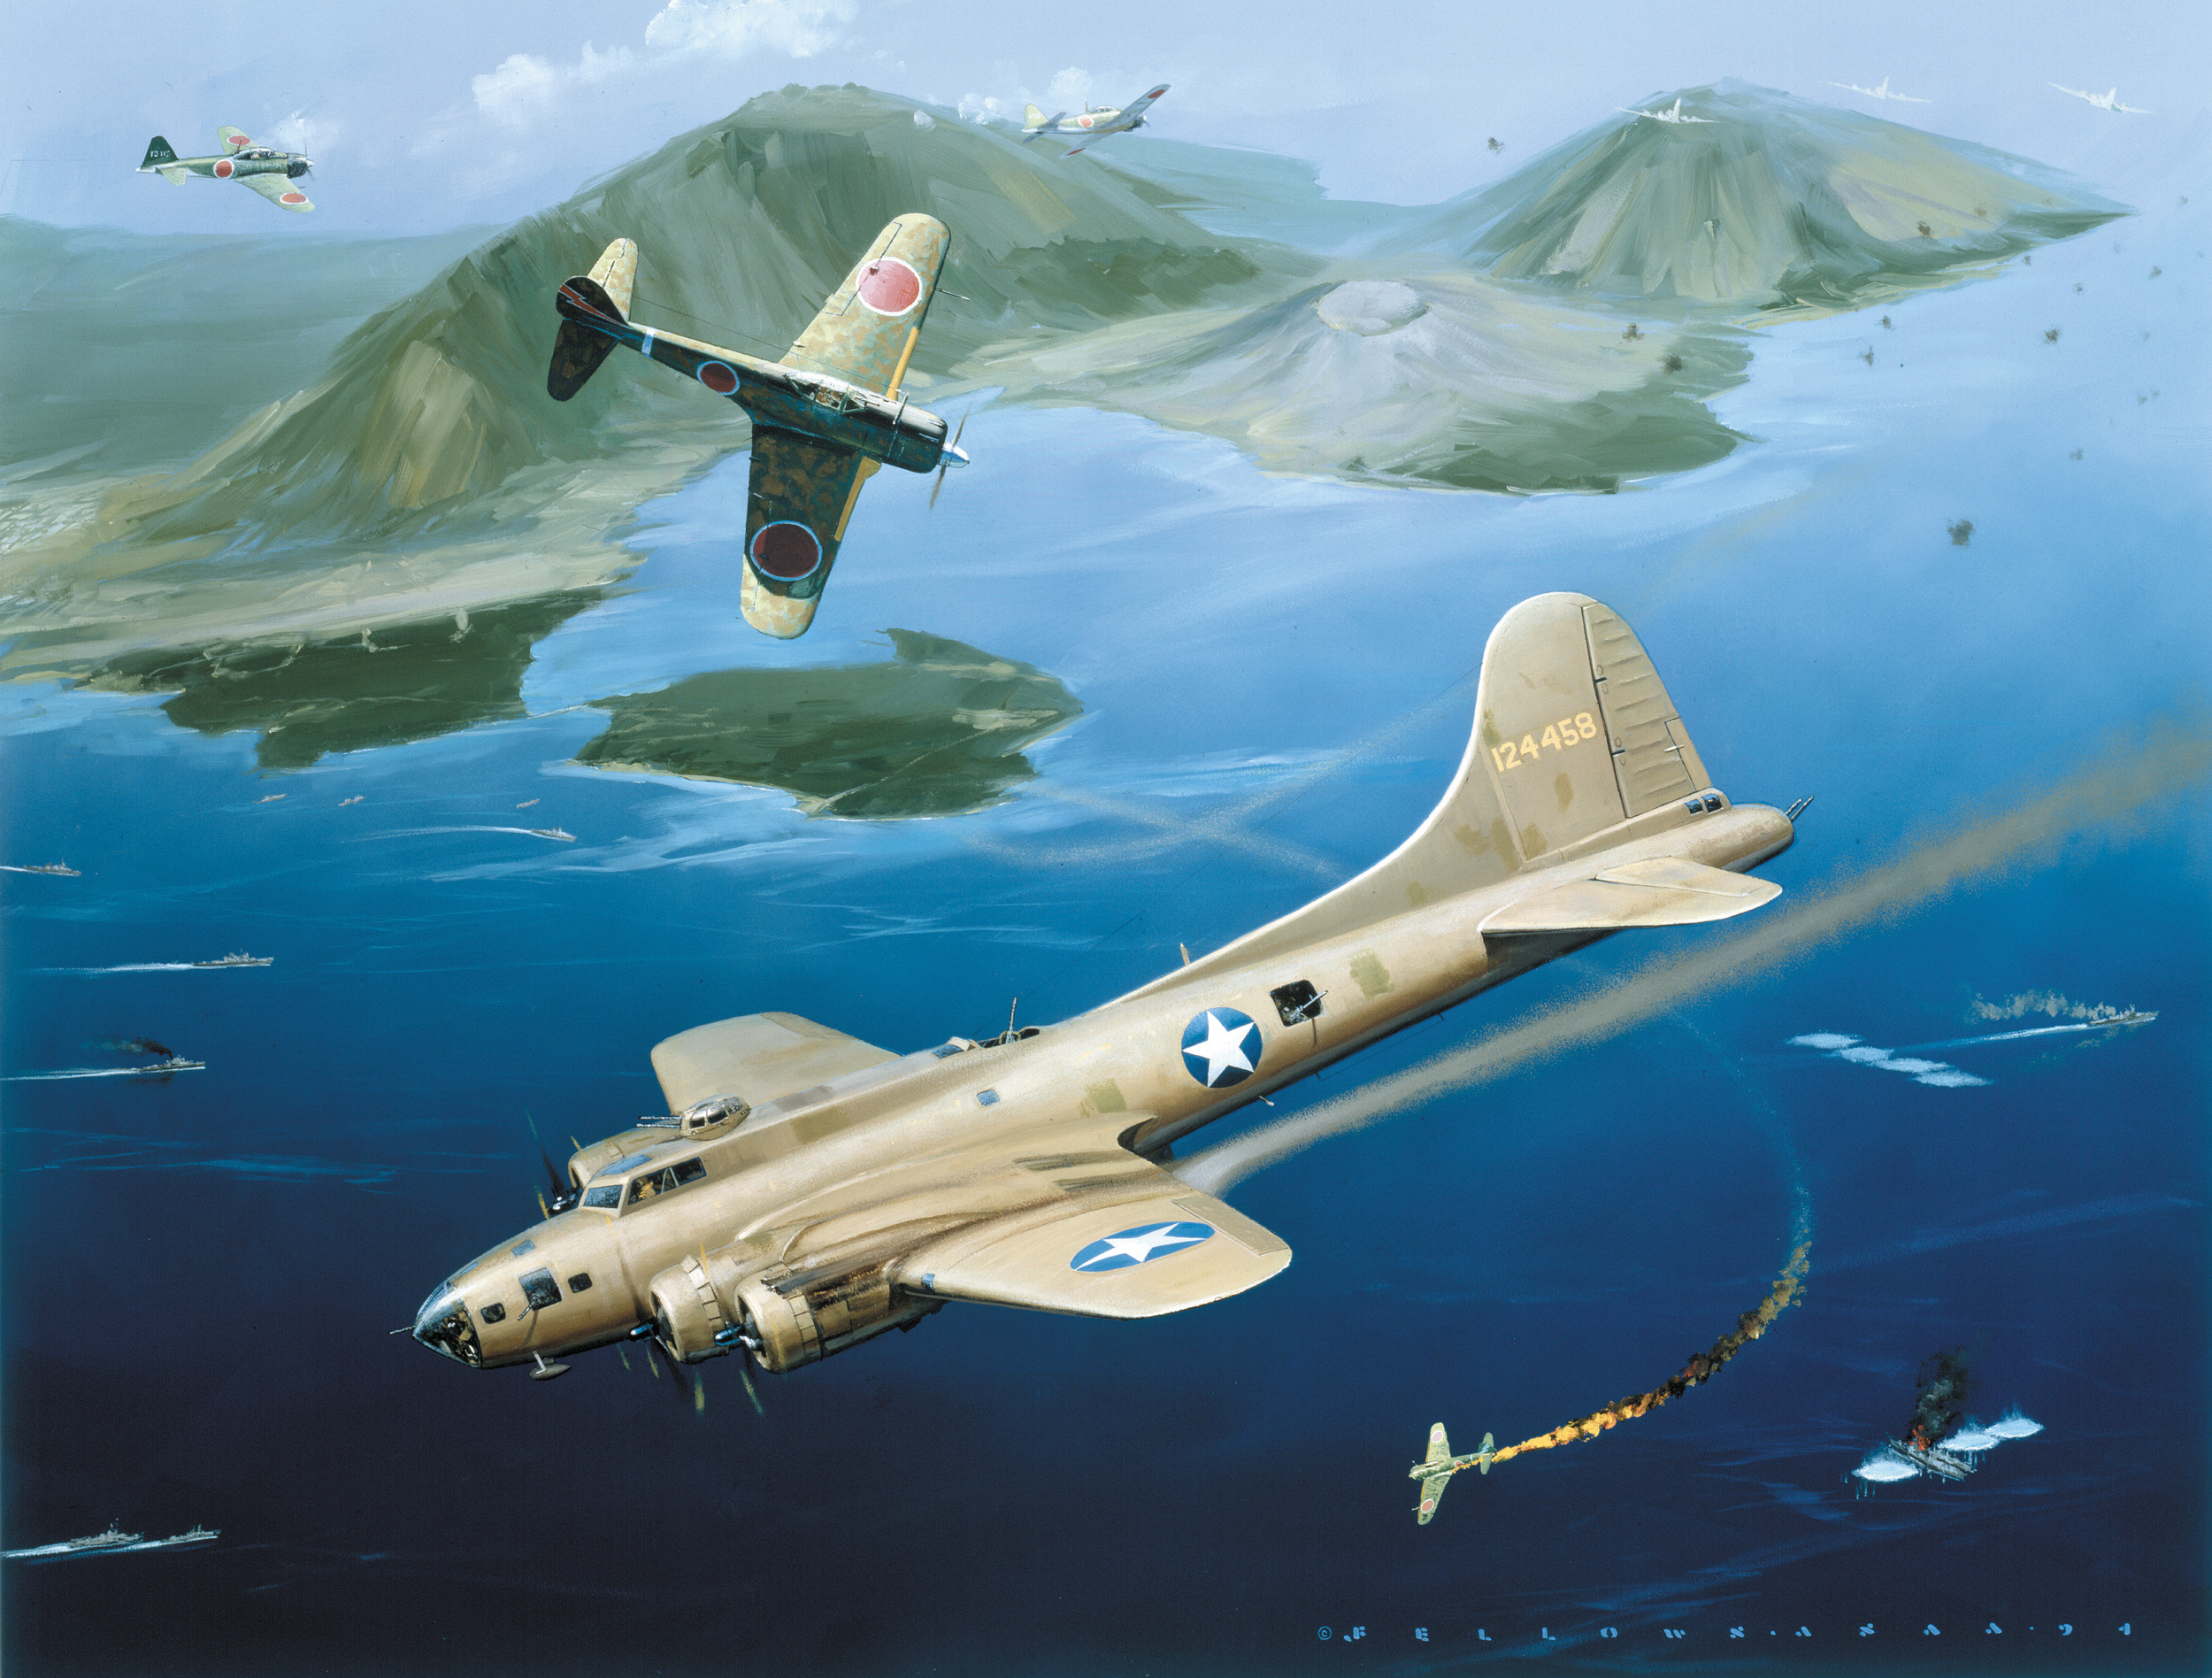 The sea stretched out beneath them, Japanese zeros swarm around a B-17 bomber during the assault on the Japanese stronghold of Rabaul in this painting by Jack Fellows.